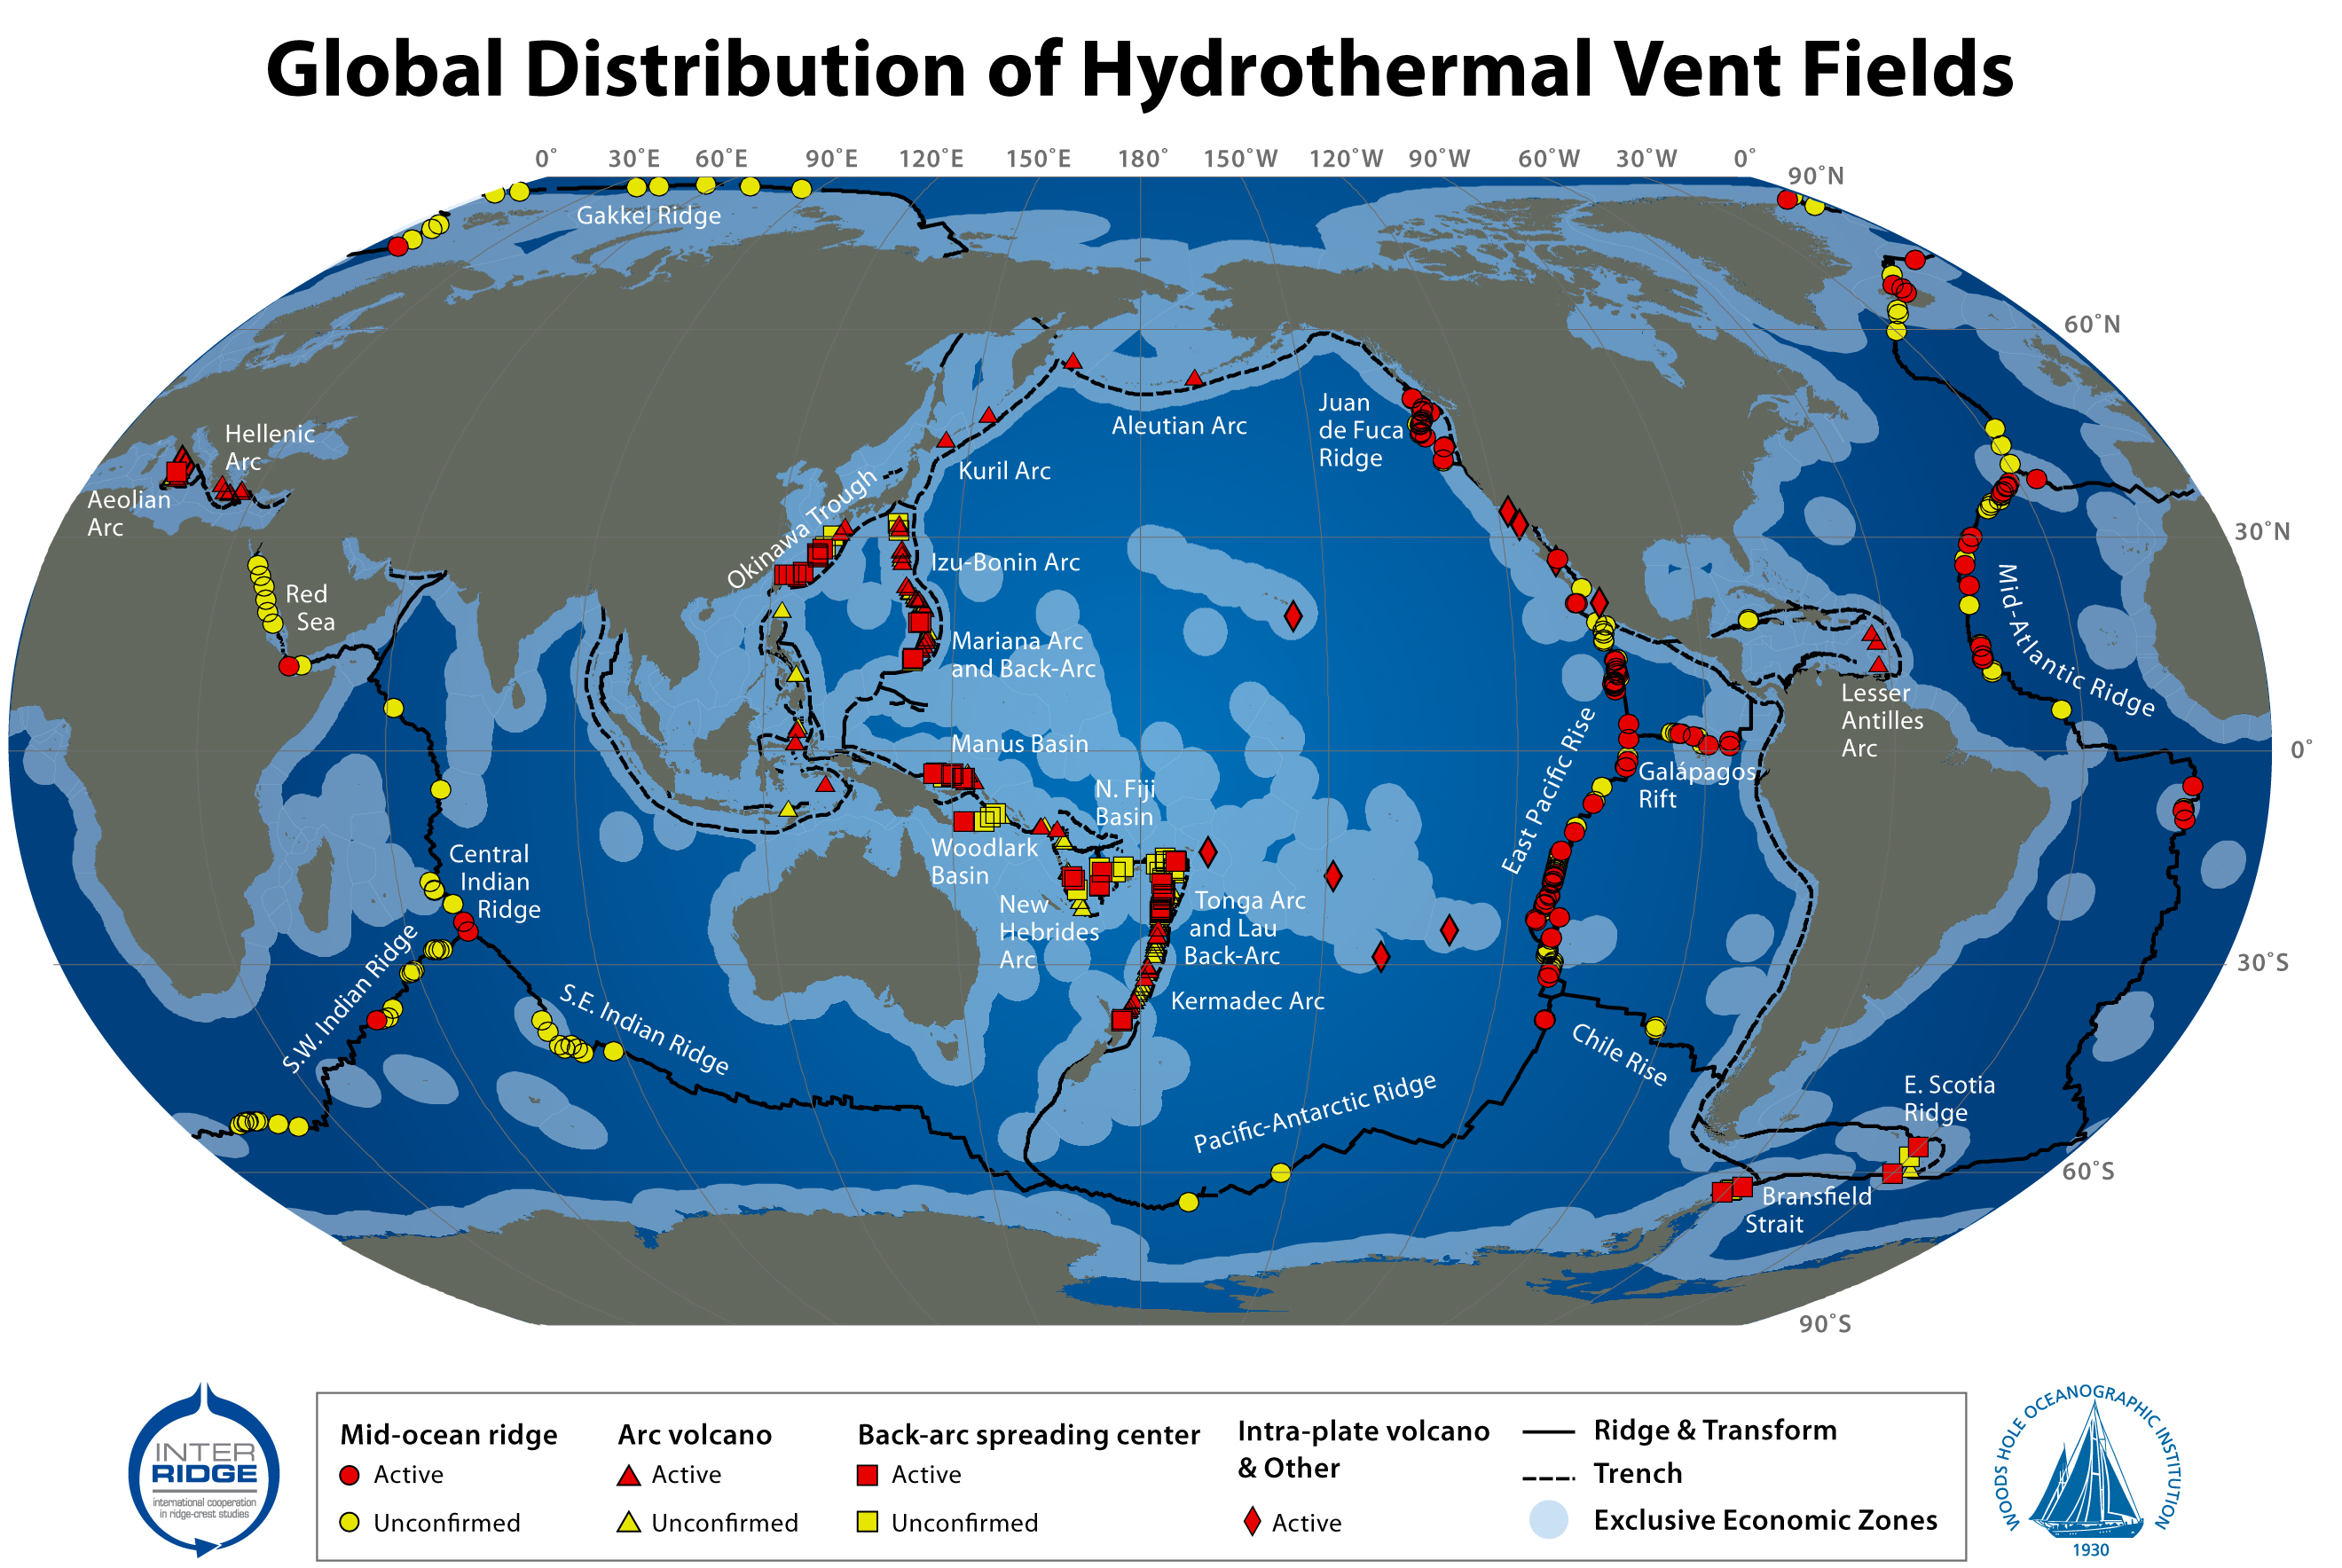 Map of hydrothermal vents (S. Beaulieu, K. Joyce, and S.A. Soule (WHOI), 2010; funding from InterRidge and Morss Colloquium Program at WHOI) 